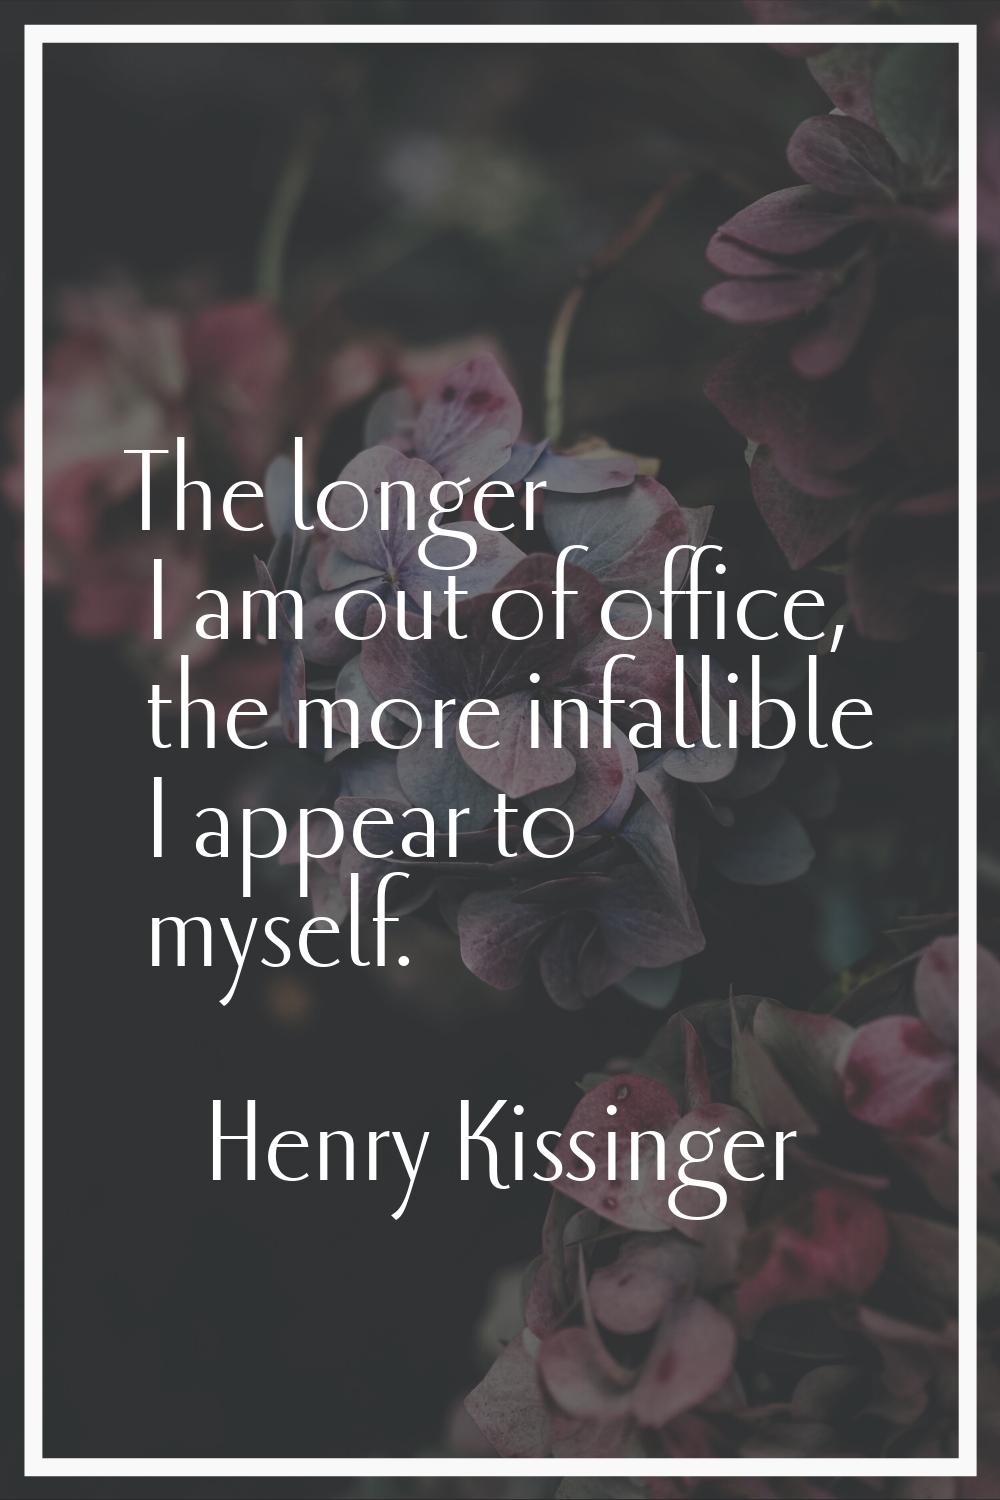 The longer I am out of office, the more infallible I appear to myself.